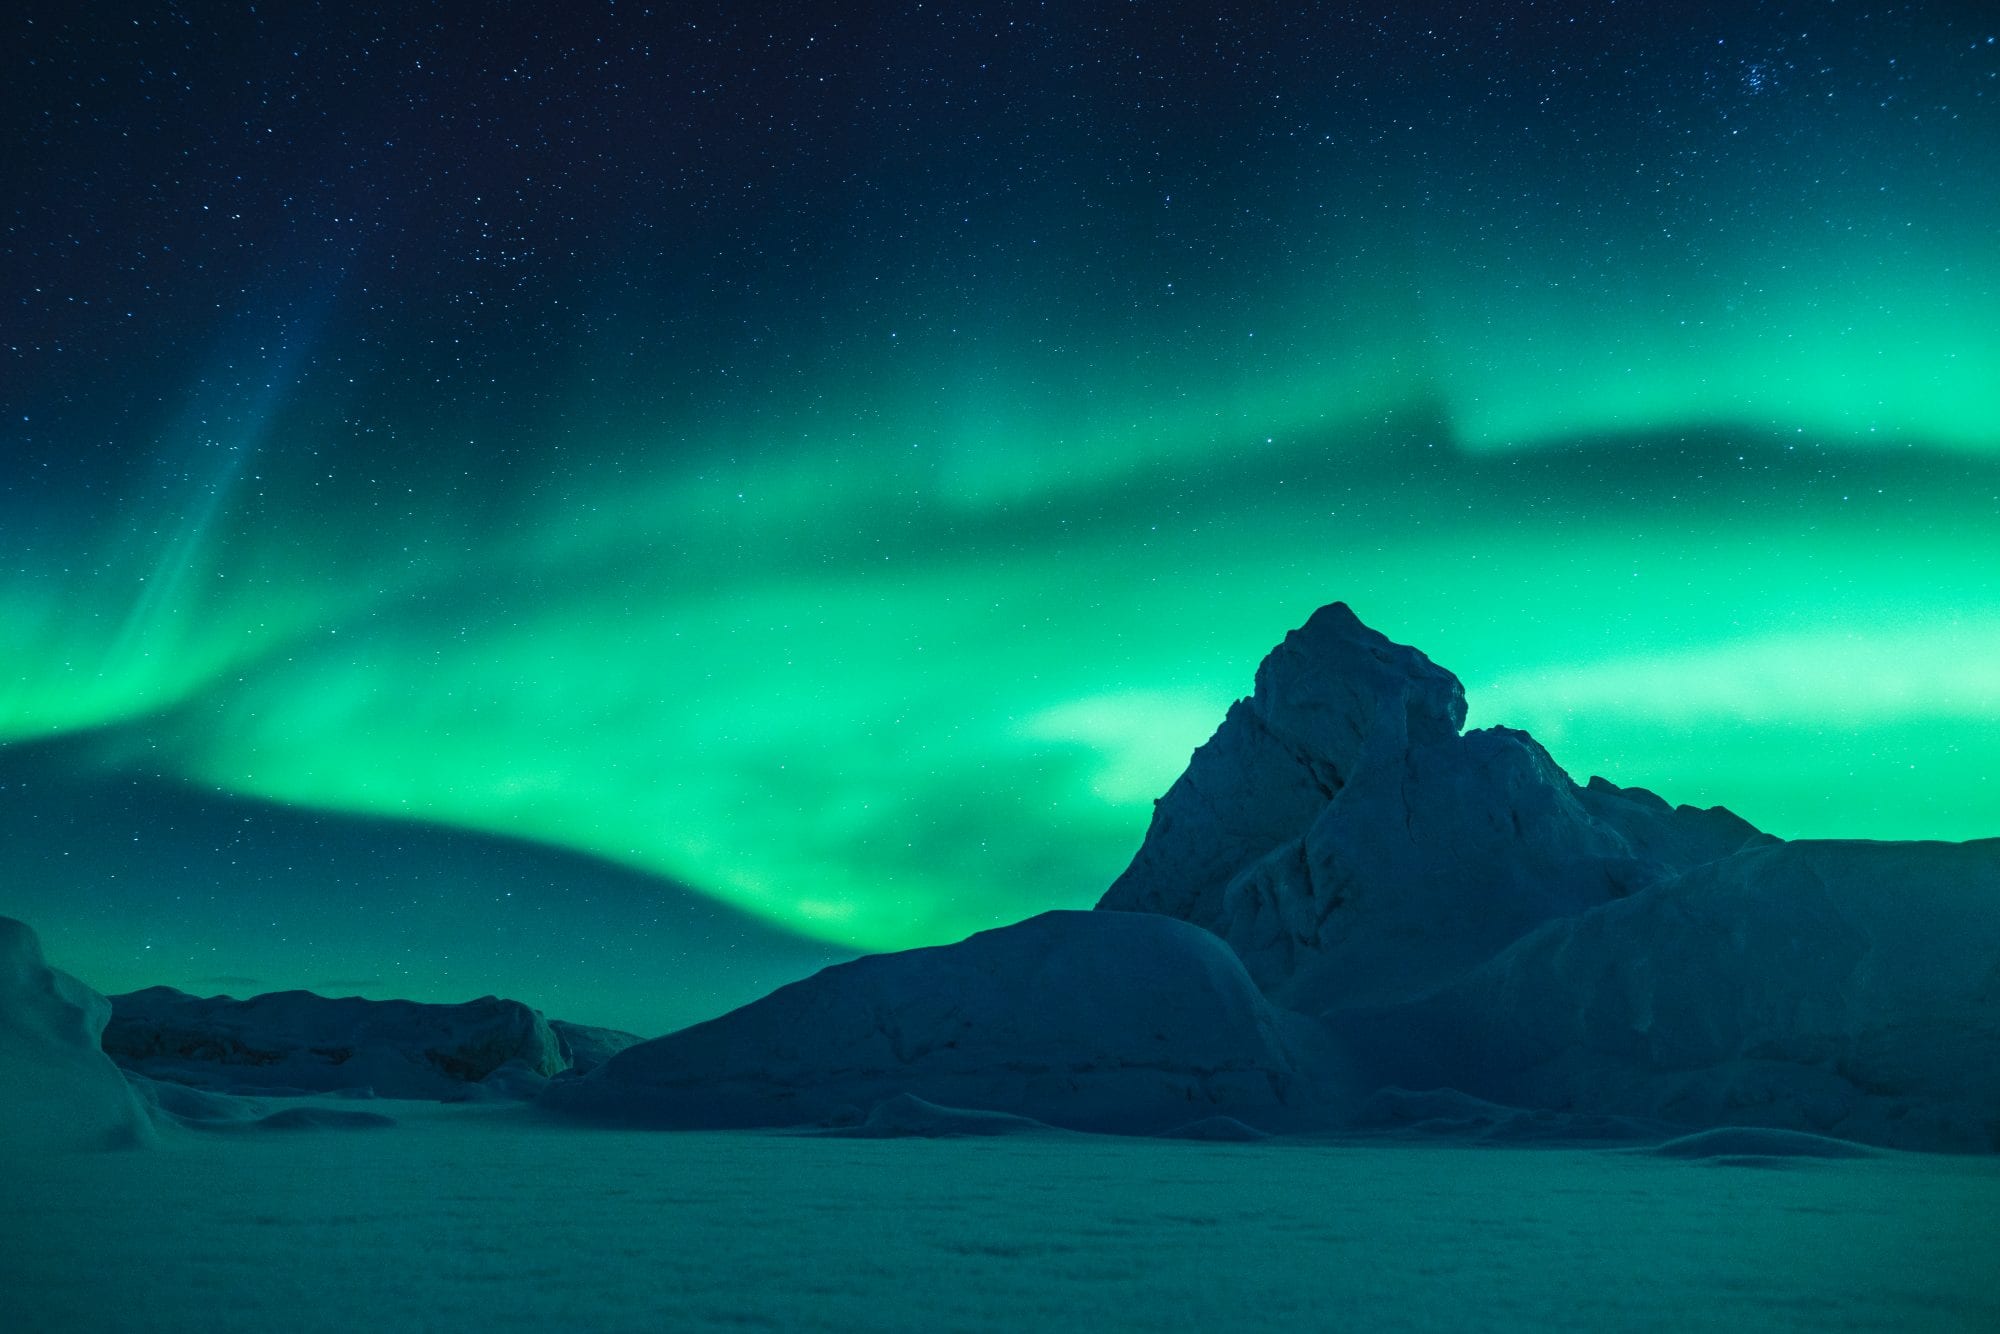 A snowy Arctic scene lit up by the Northern Lights display overhead